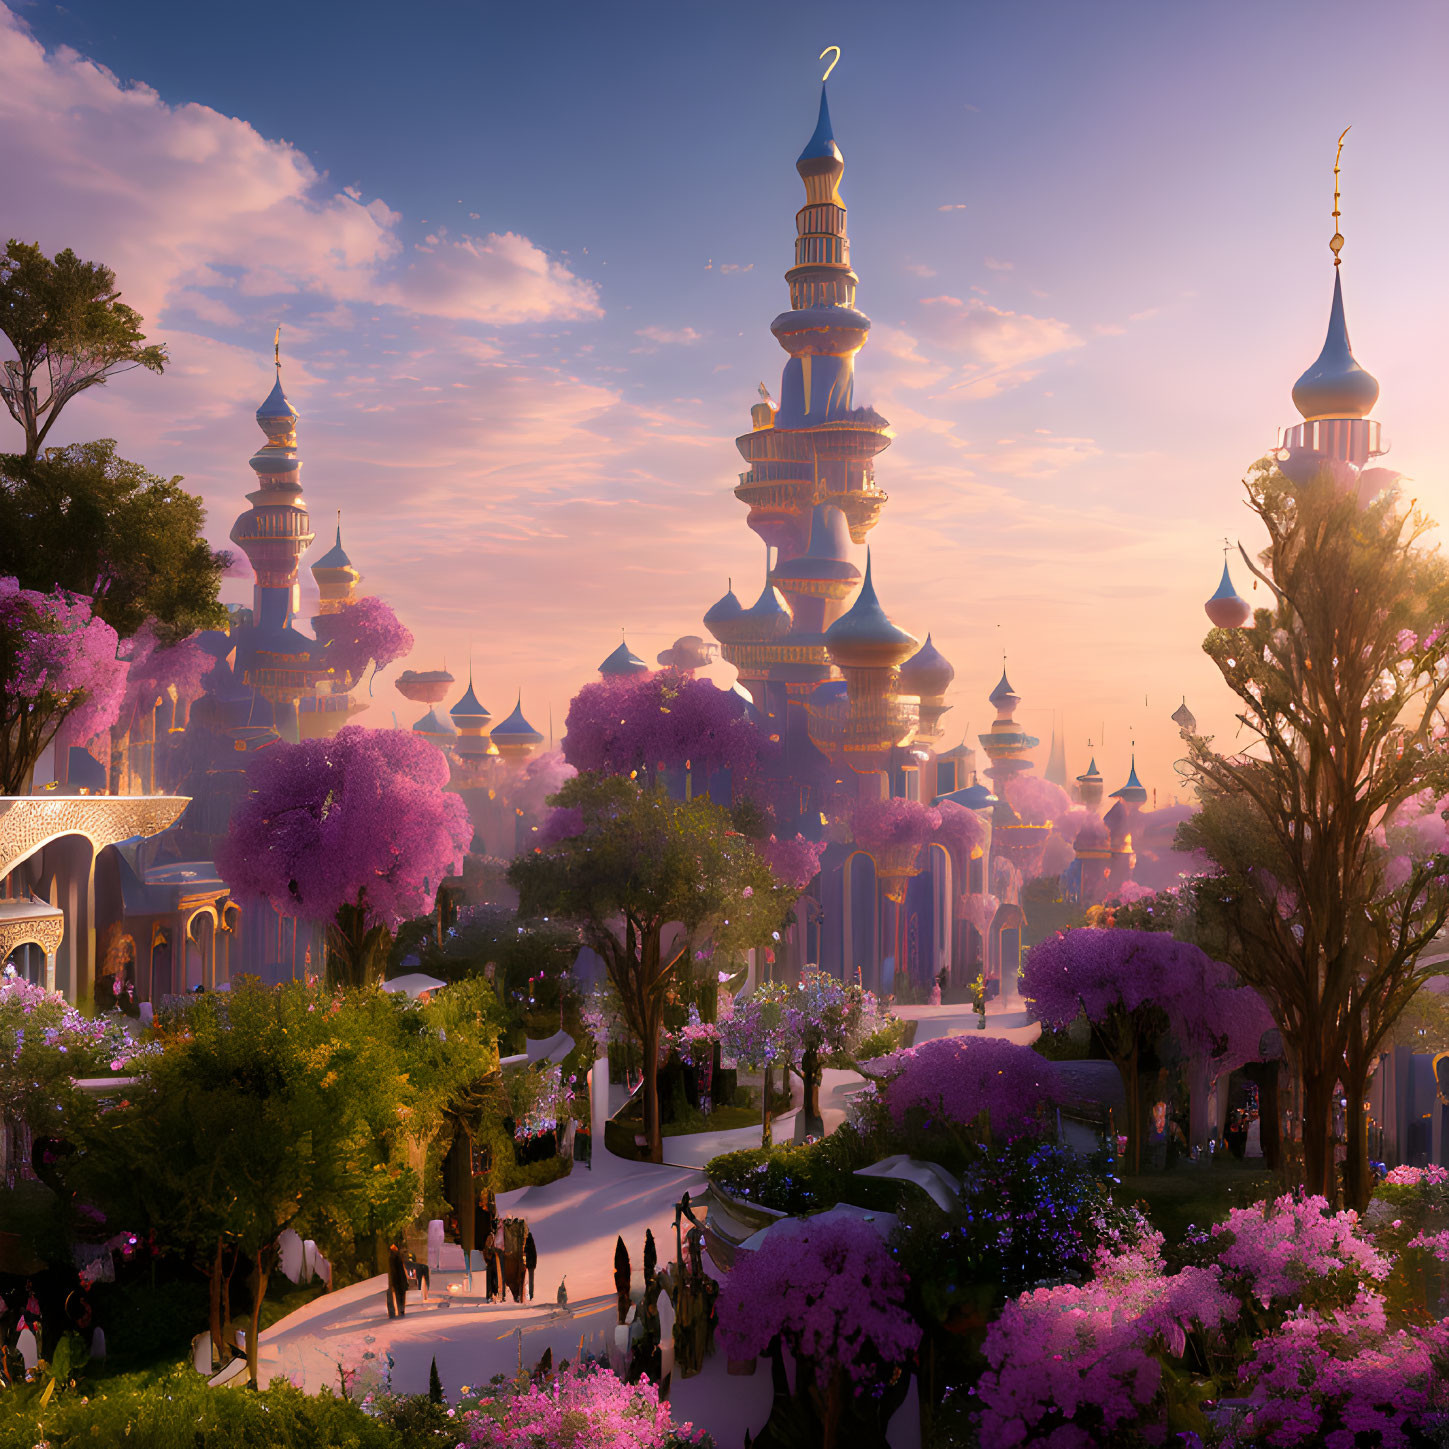 Fantastical cityscape at sunset with towering spires and purple trees